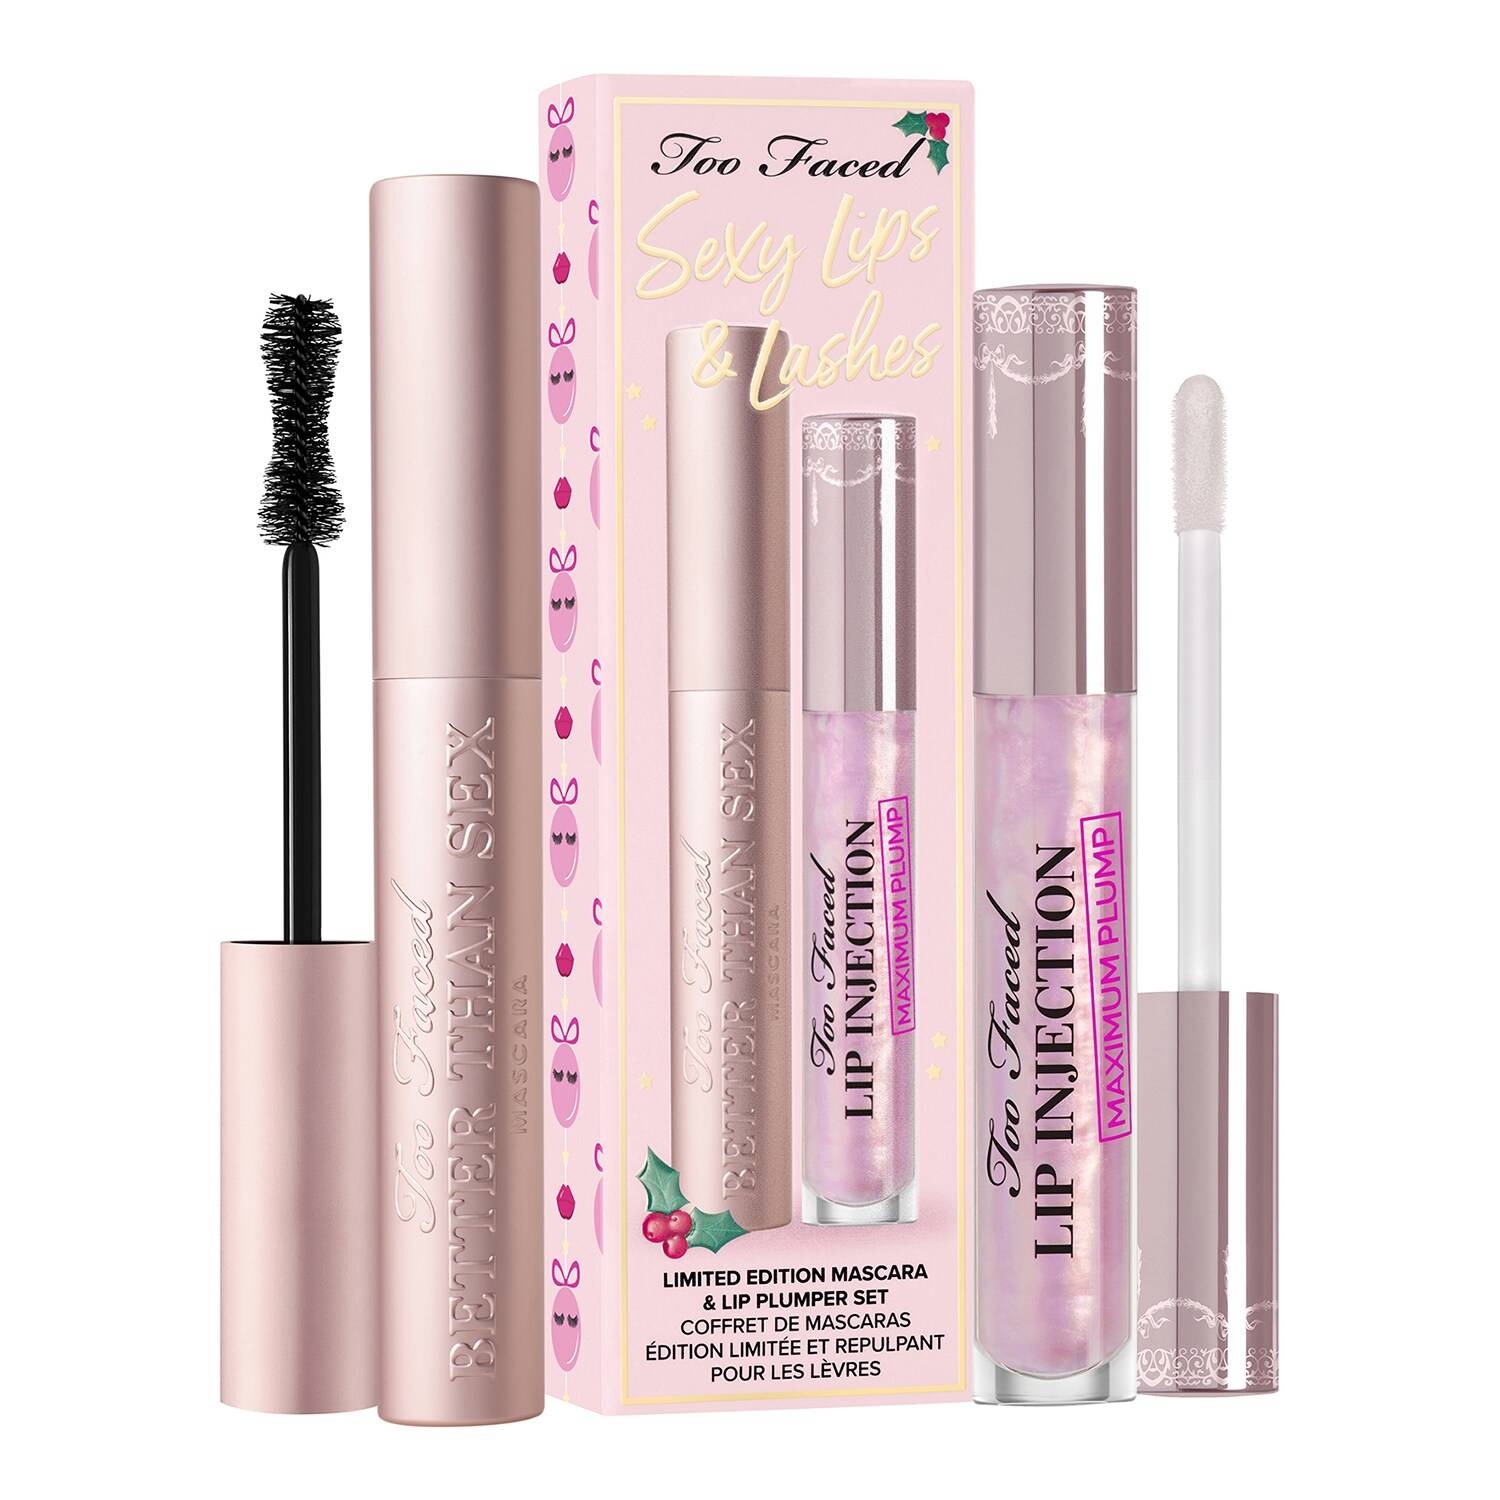 too faced sexy lips & lashes – makeup set